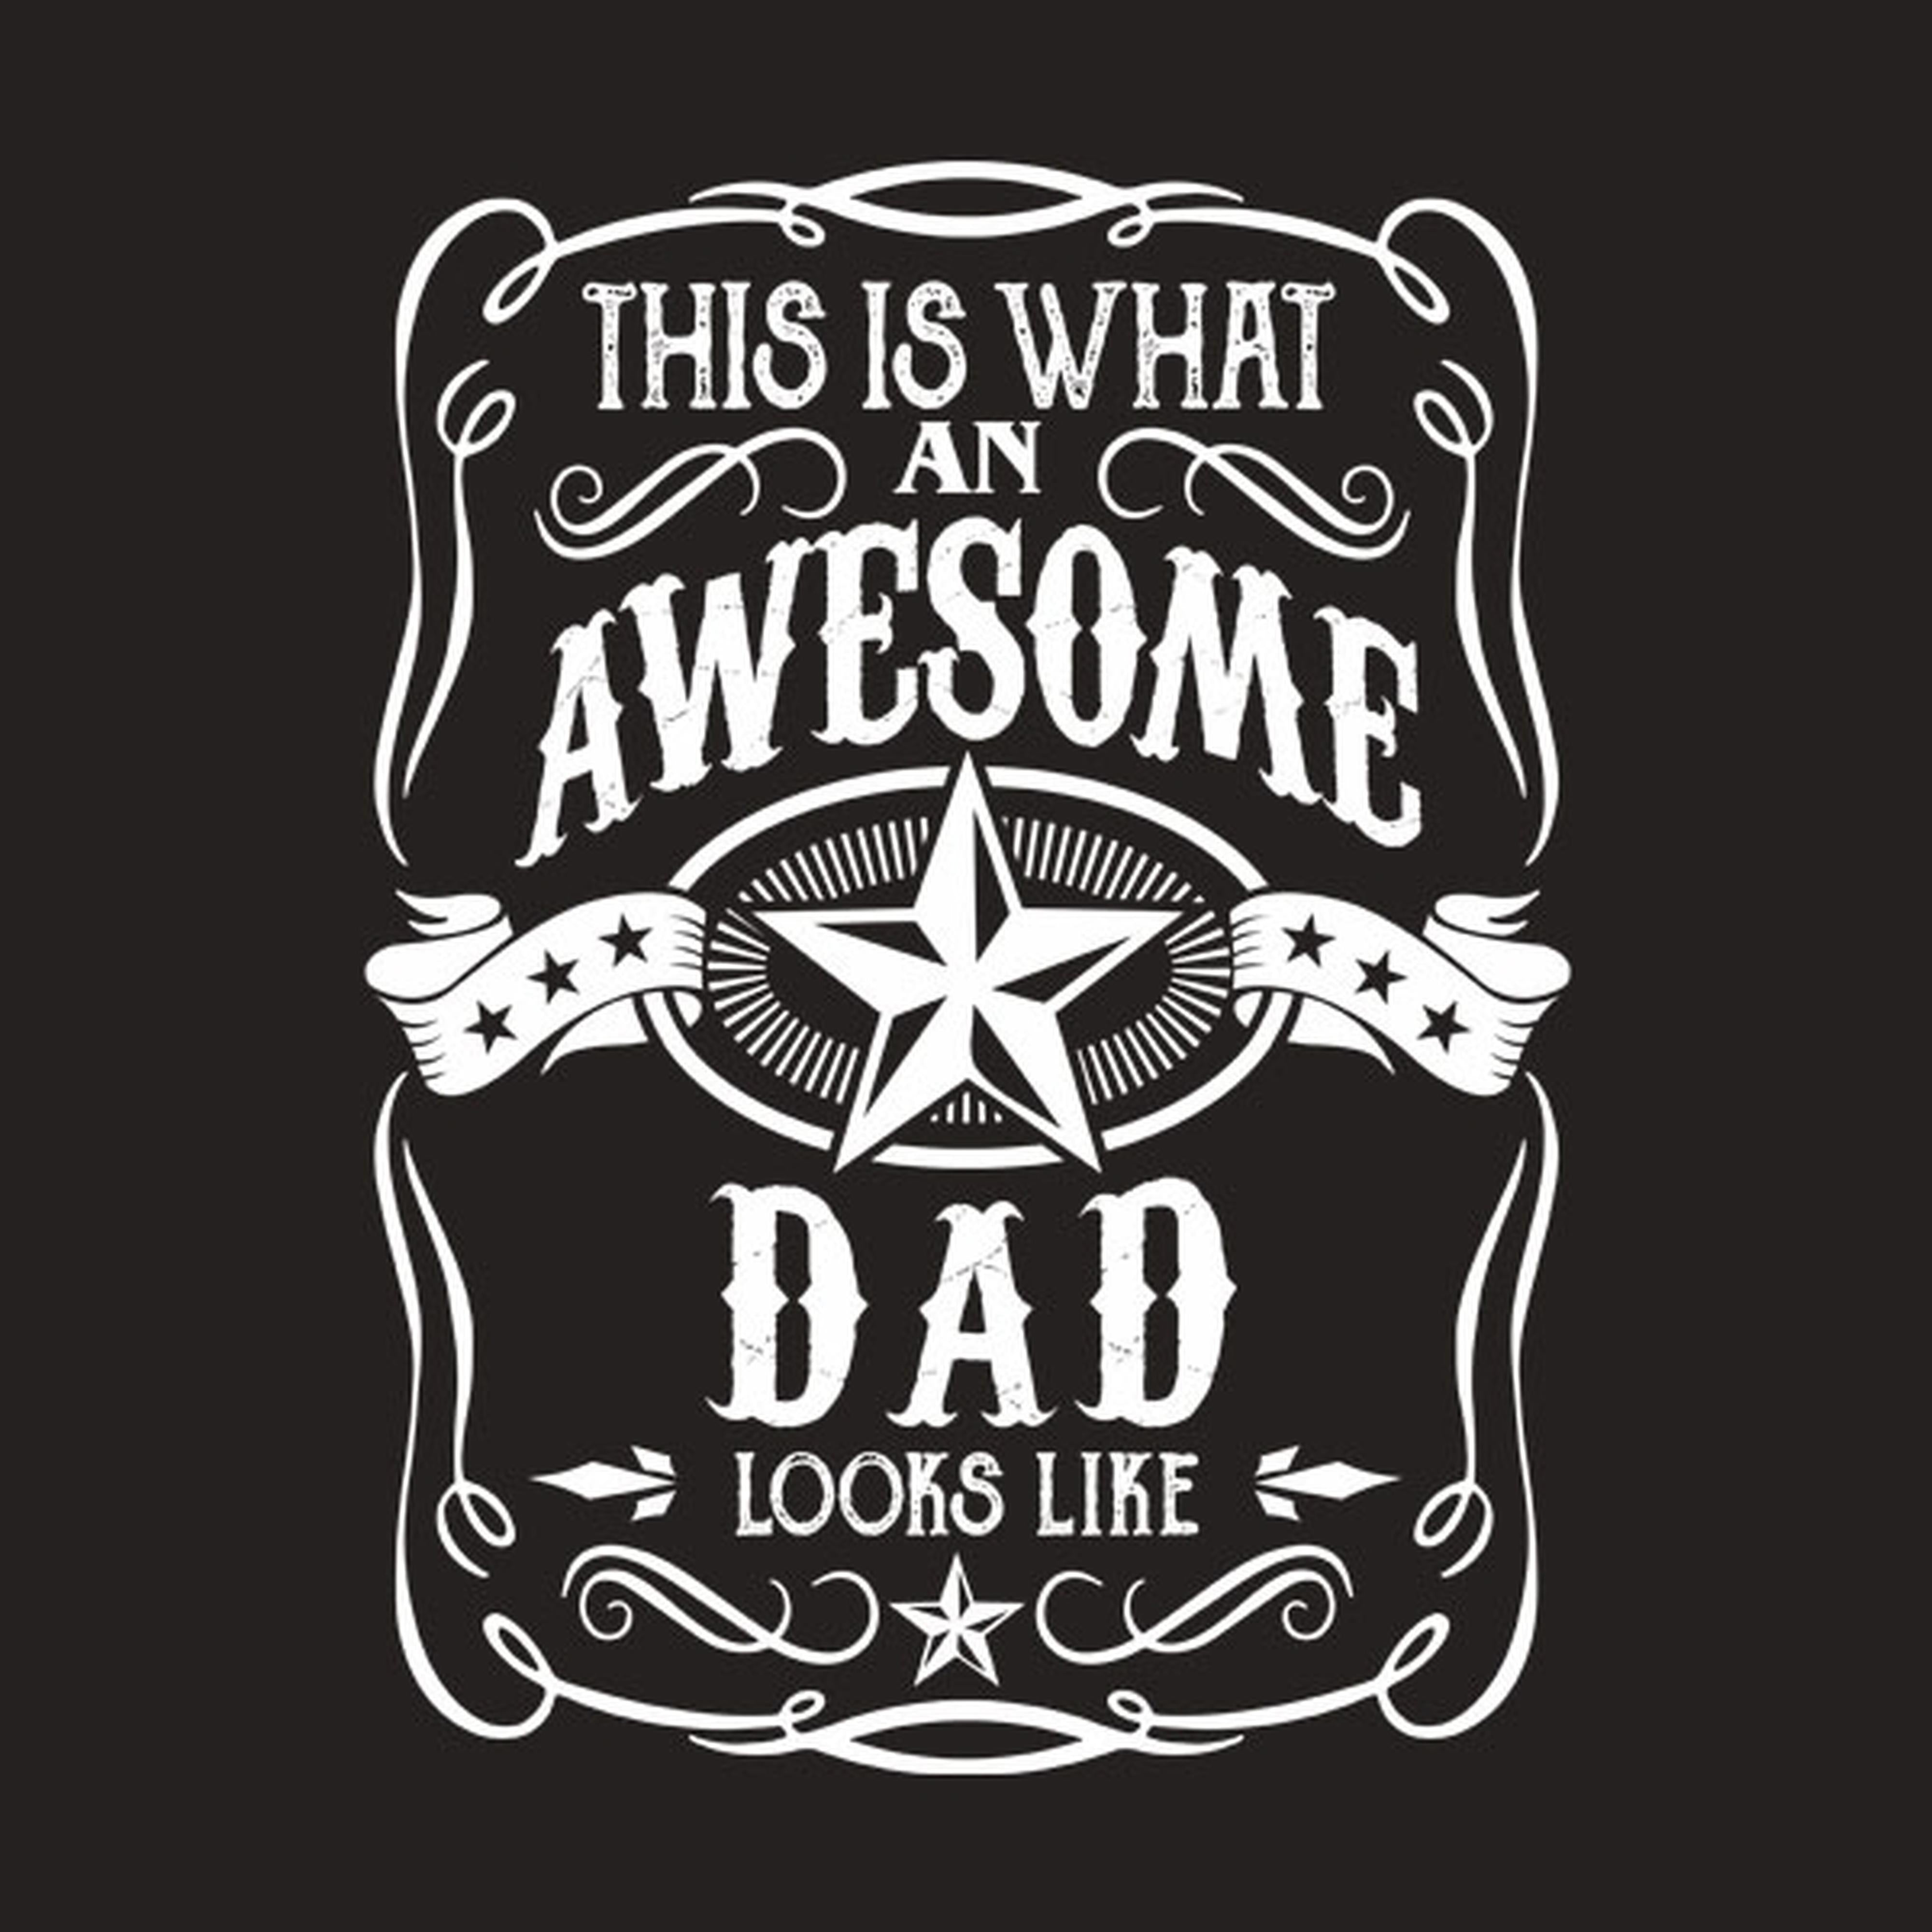 This is what an awesome dad looks like - T-shirt